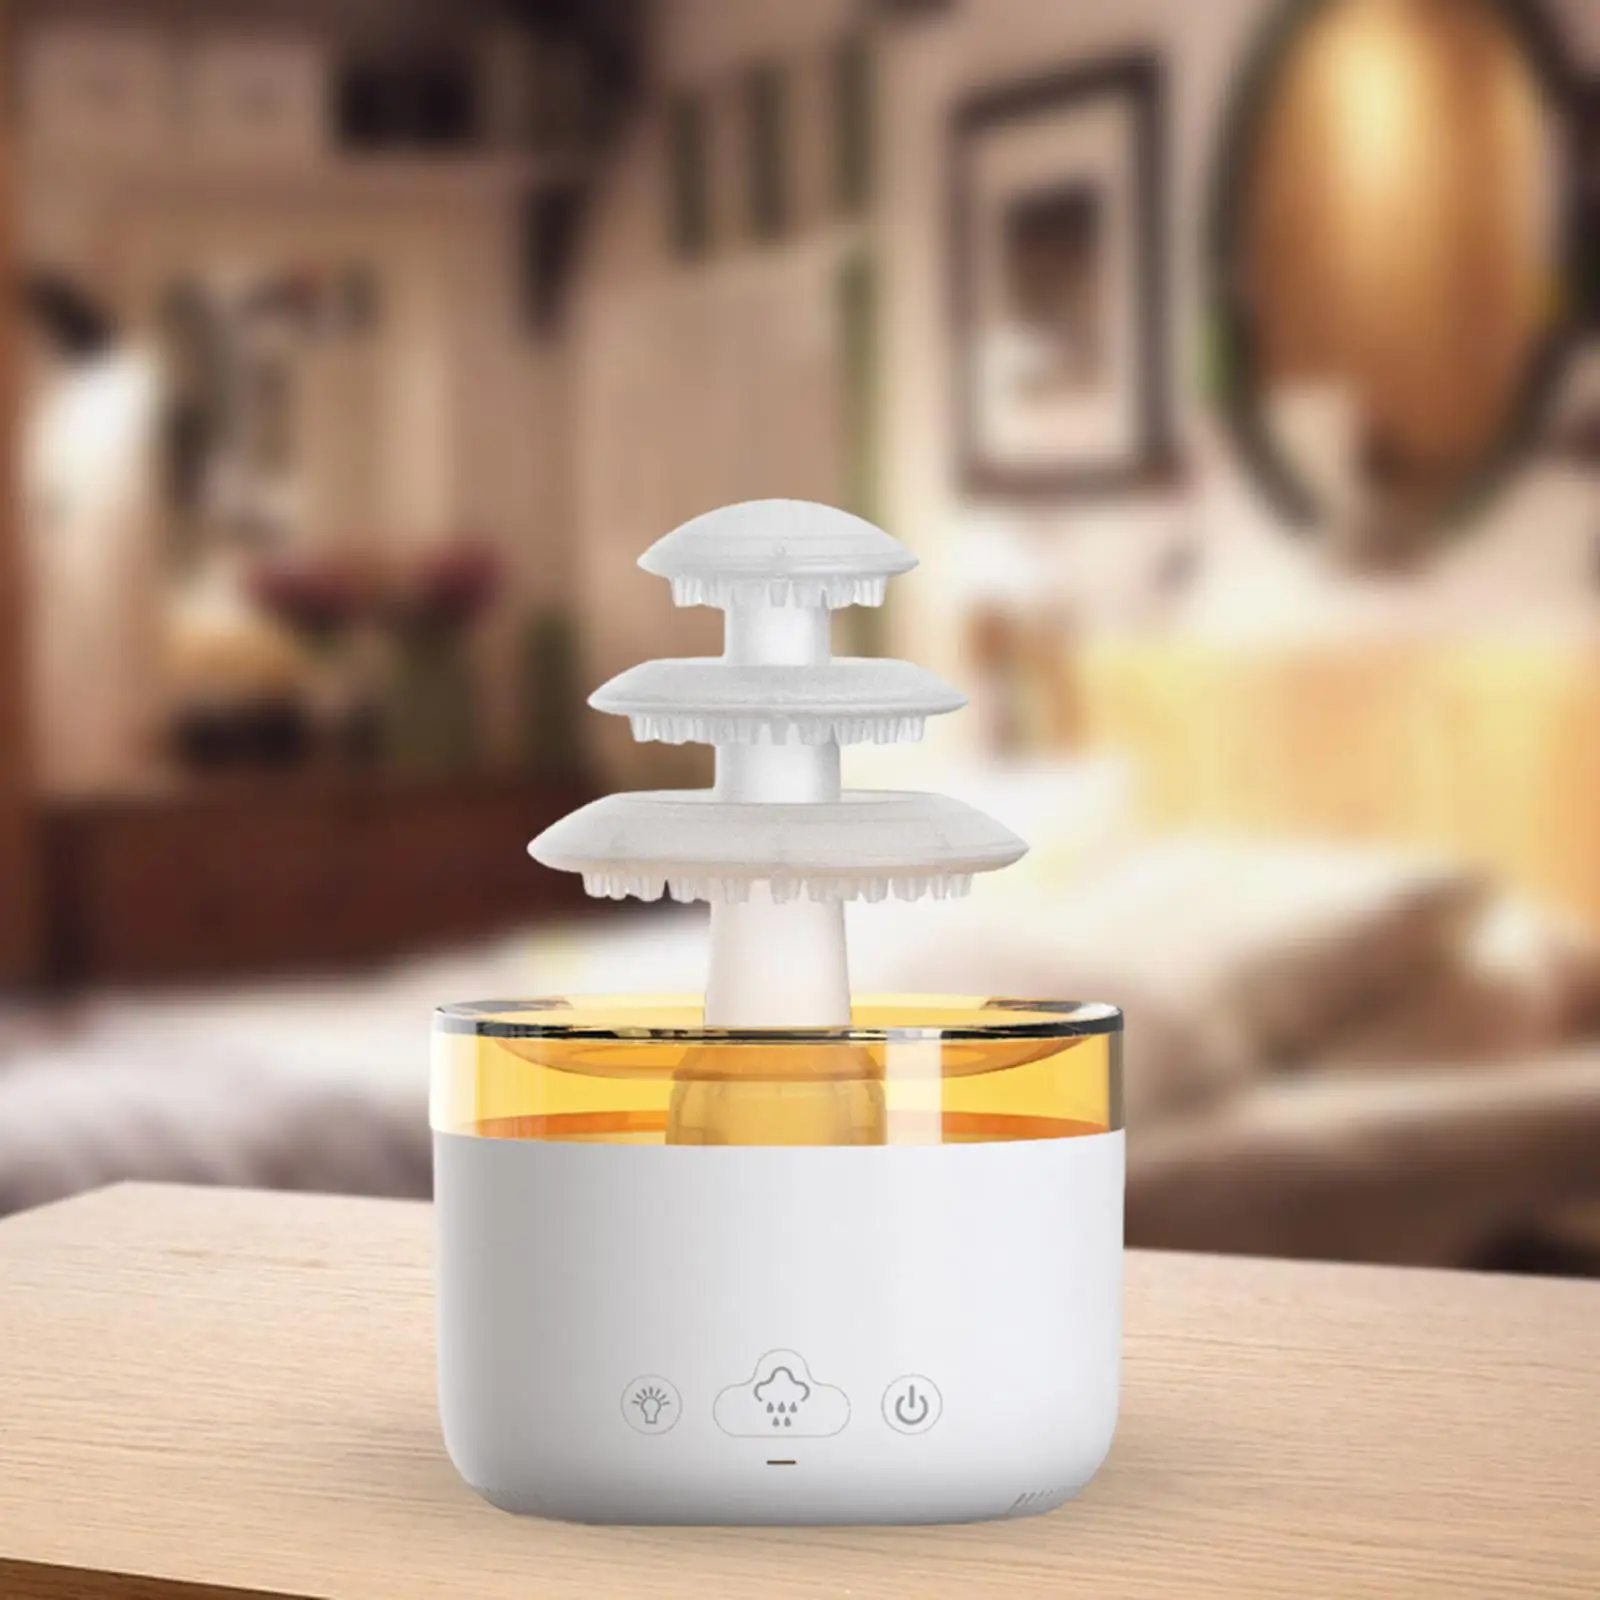 Diffusers for Essential Oils 500ml Premium 7 Colors Lights Changing Air Humidifier for Bedroom Study Office Bathroom Home Decor